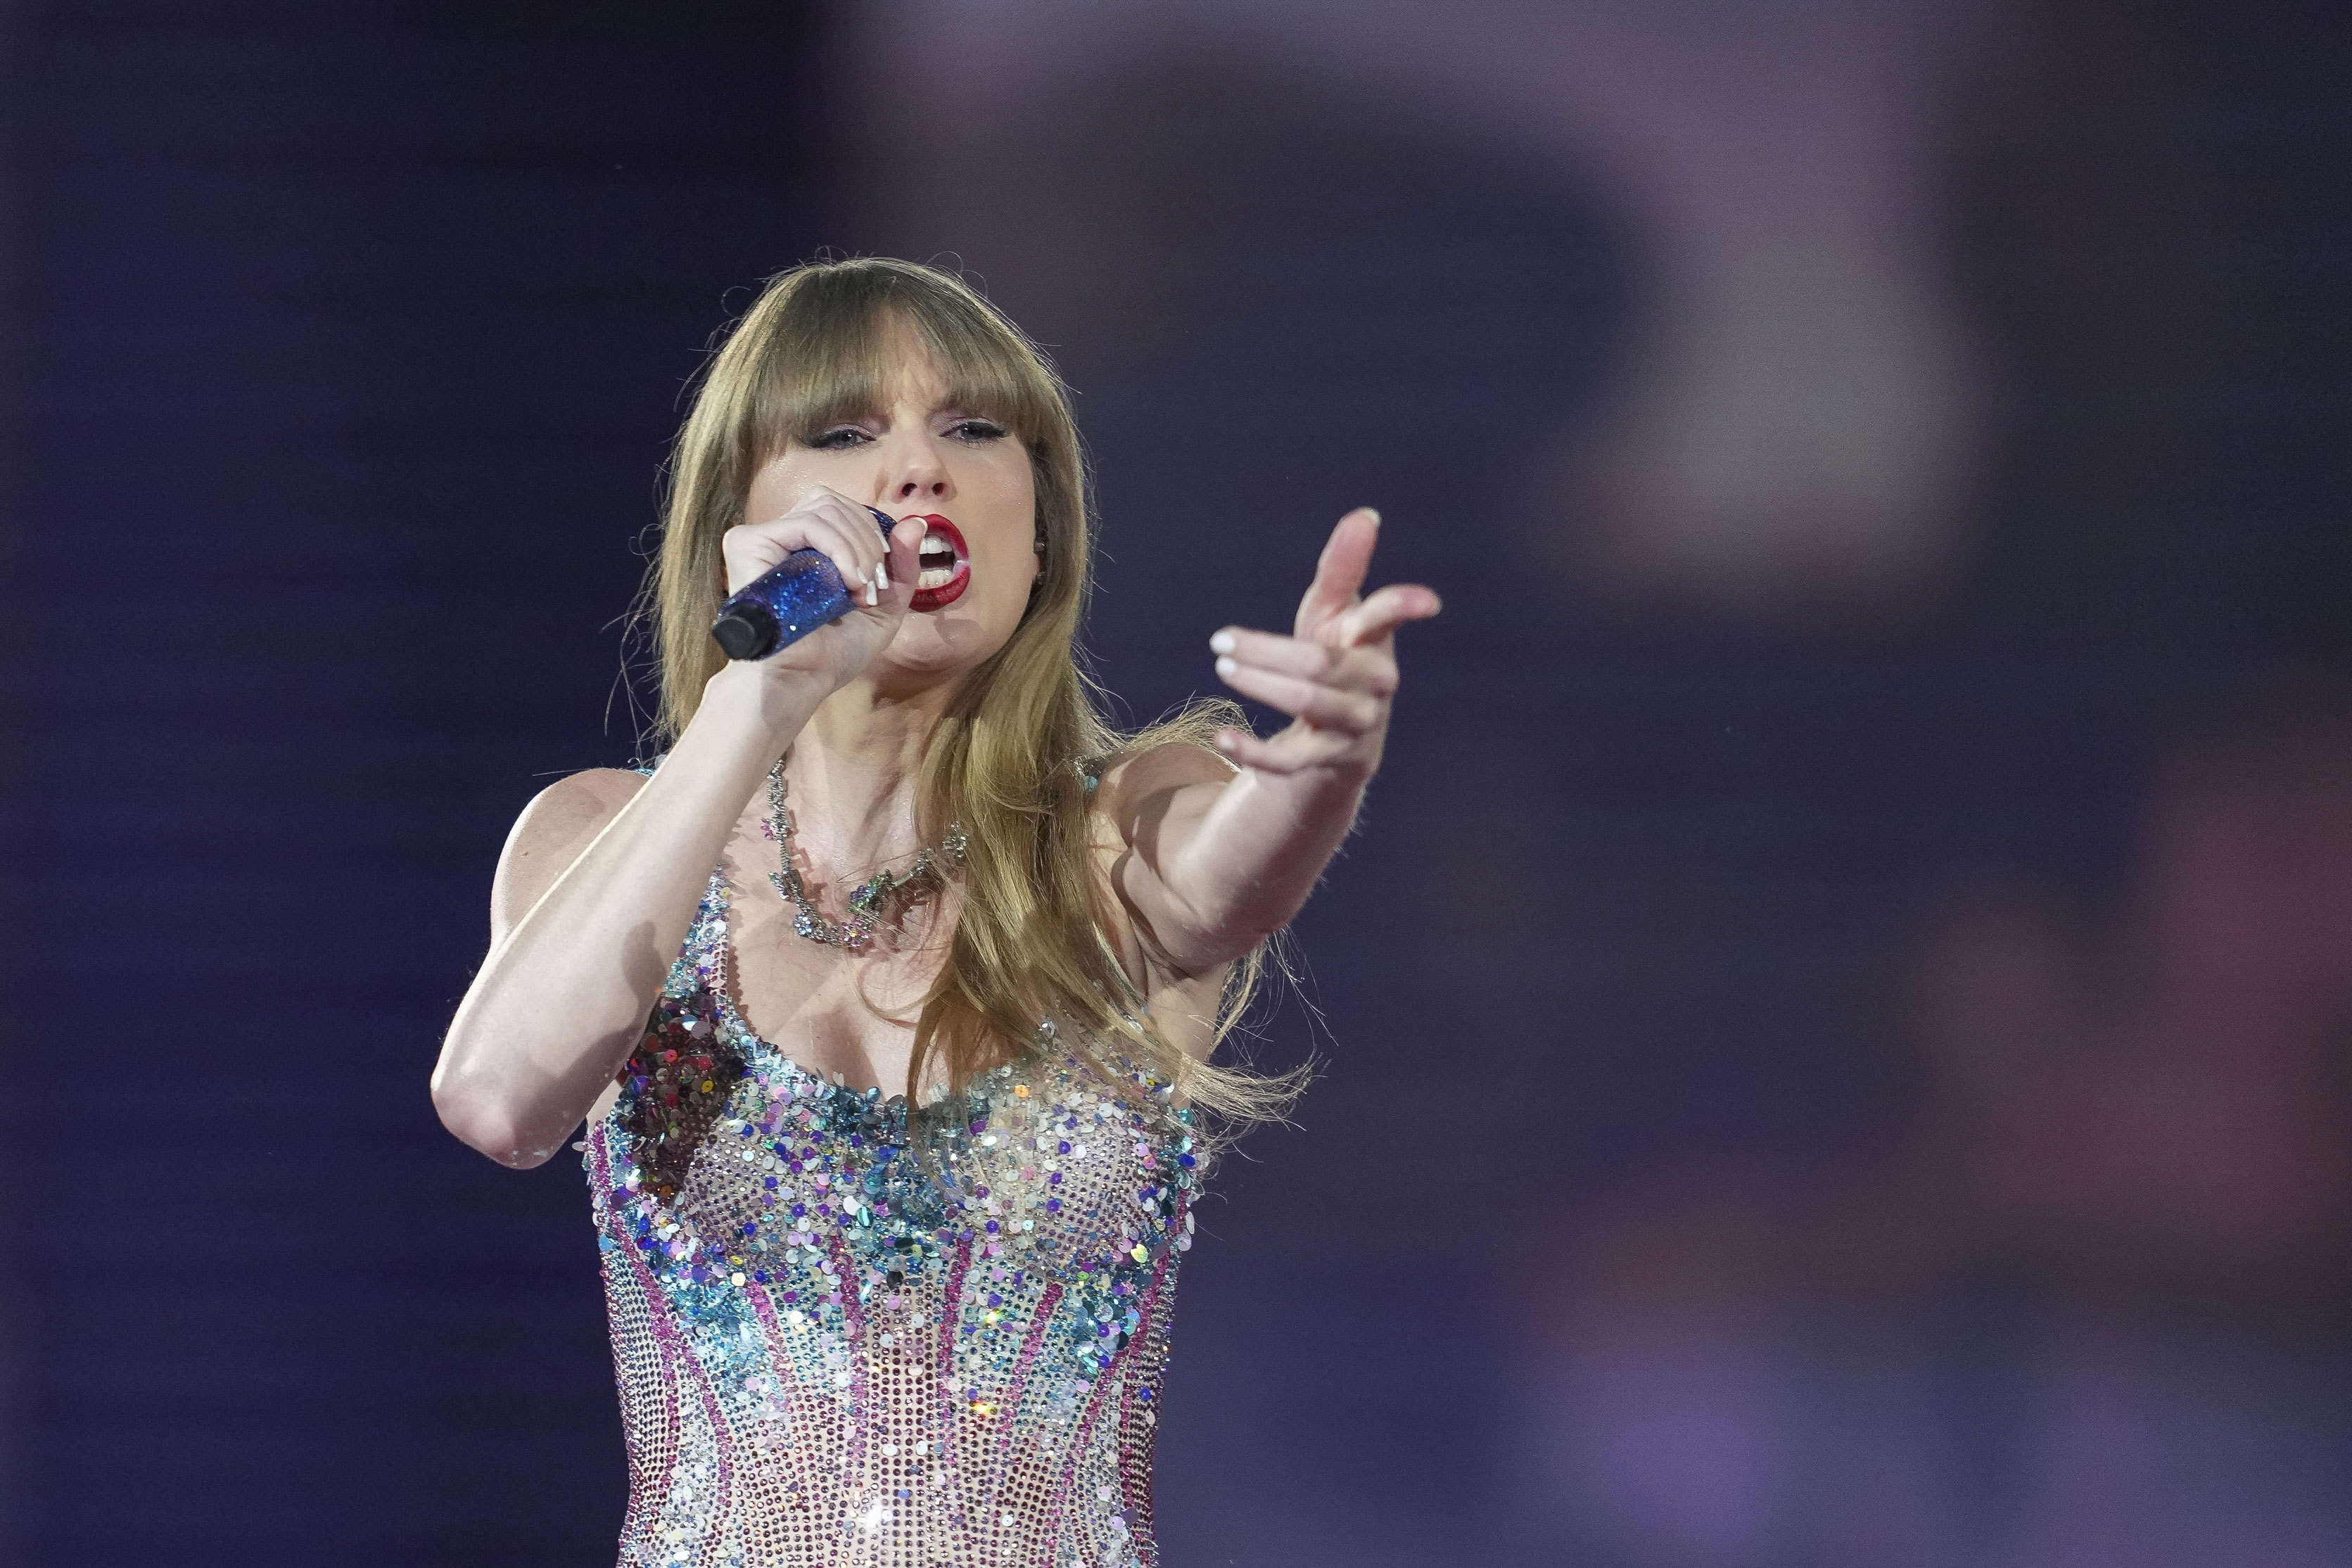 Taylor Swift performs as part of the "Eras Tour" at the Tokyo Dome